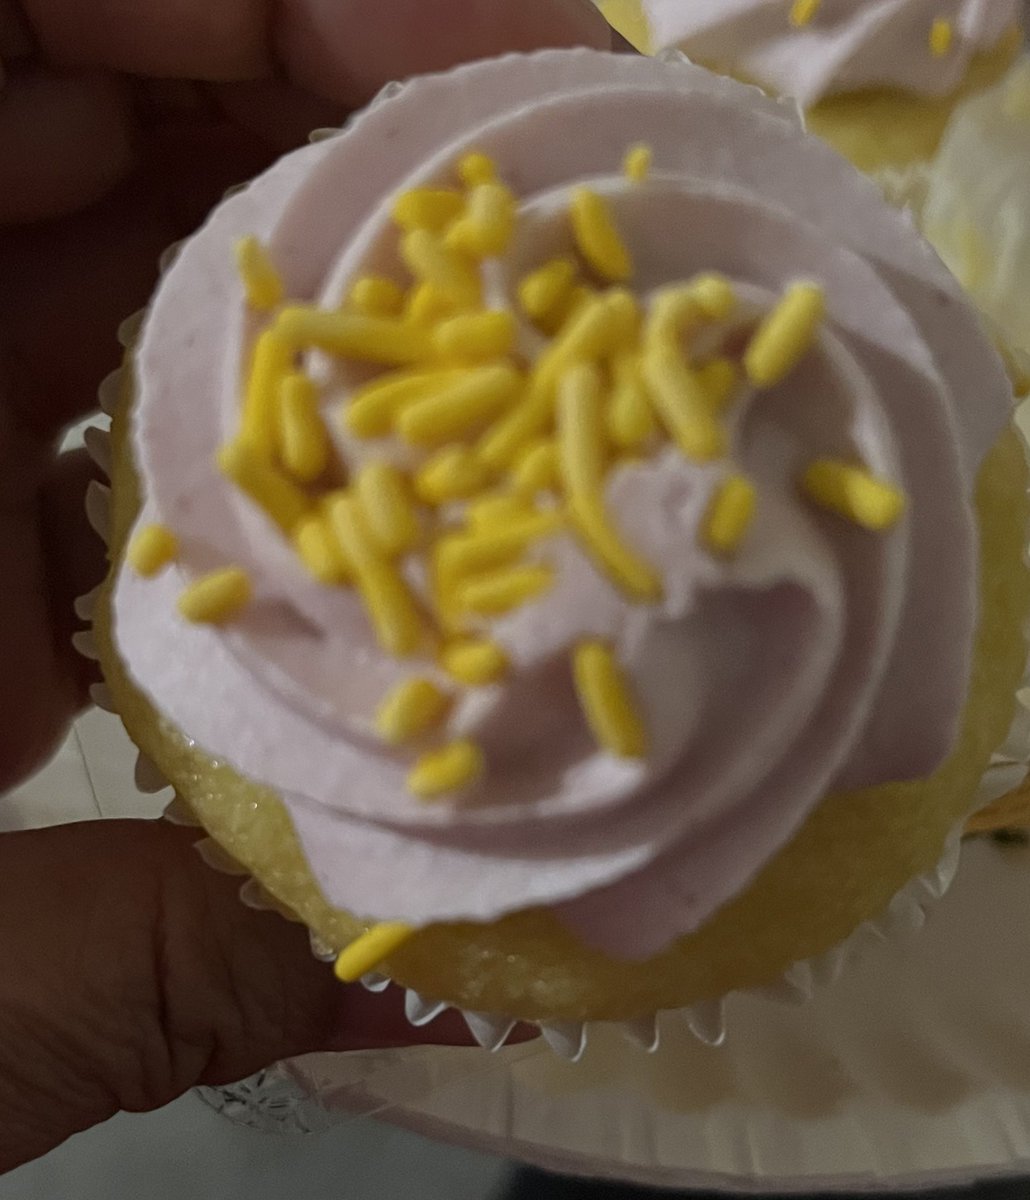 Vegan Lemon Raspberry Cupcake 🧁 😋 this is giving me ideas of what type of cupcakes OR cake I want for my upcoming big MILESTONE birthday. 🤔 😌 but I’m infinitely youthful inside,forever 24-34 lol
💖💚❤️‍🔥🤍🧡💜💛 #Aries #over40women #abouttobefiftyandfabulous #agelessaging